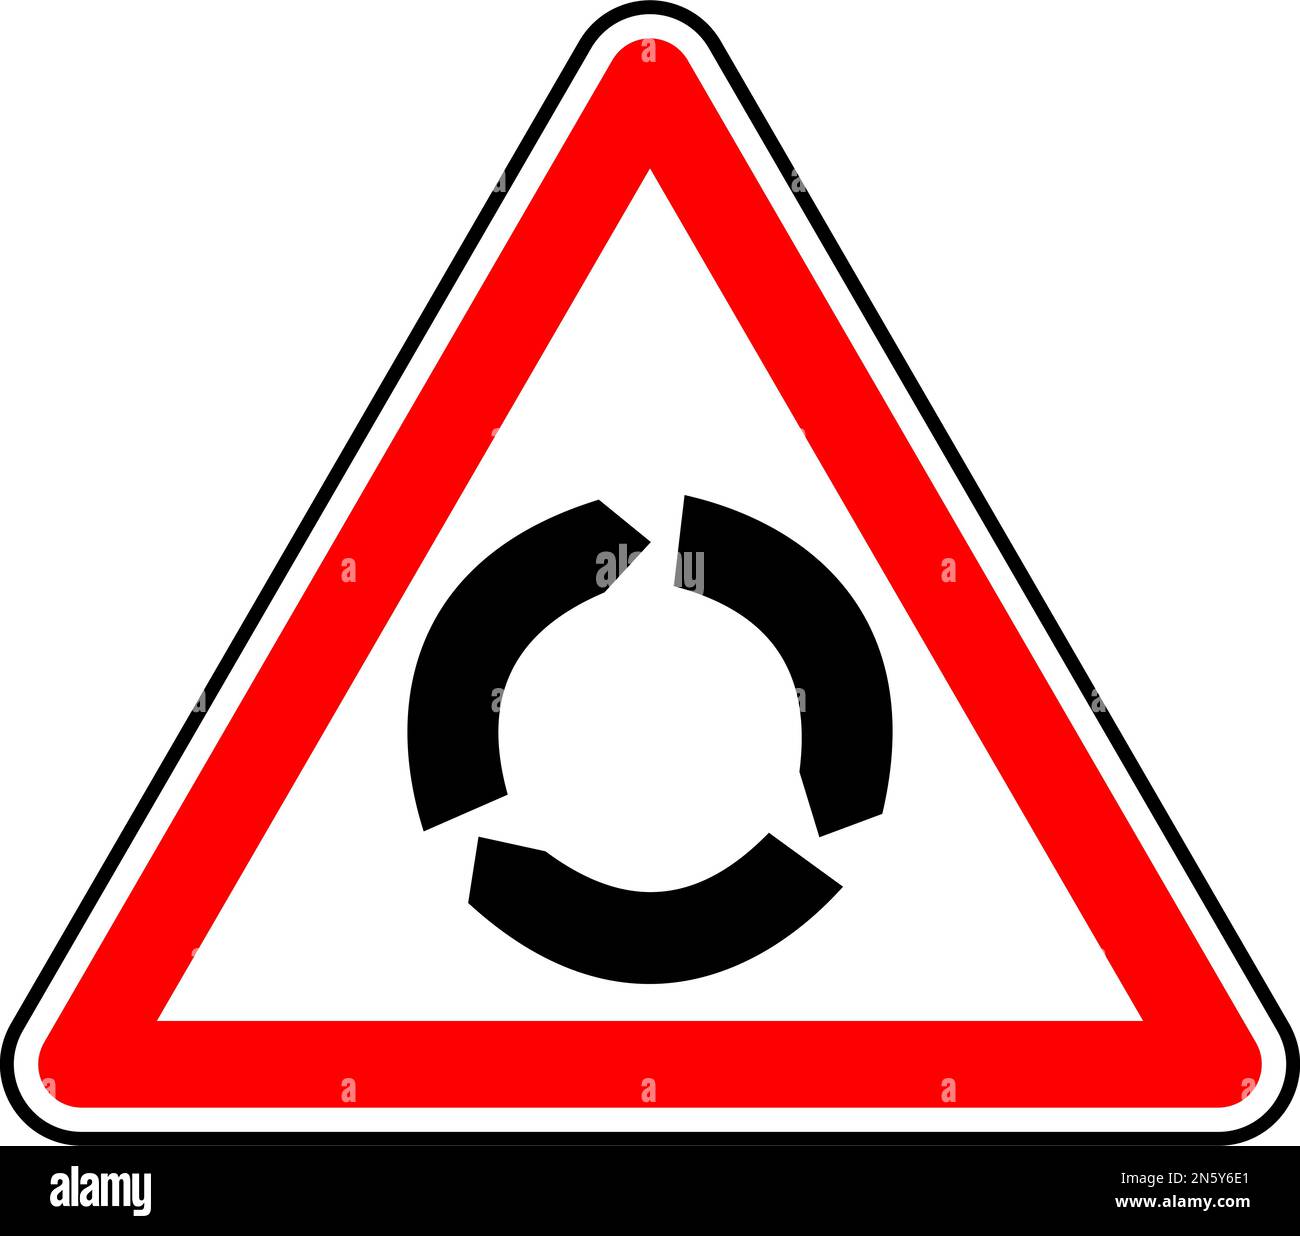 Vector graphic of a uk roundabout road sign. It consists of a depiction of three arrows pointing in a clockwise direction contained within a red trian Stock Vector